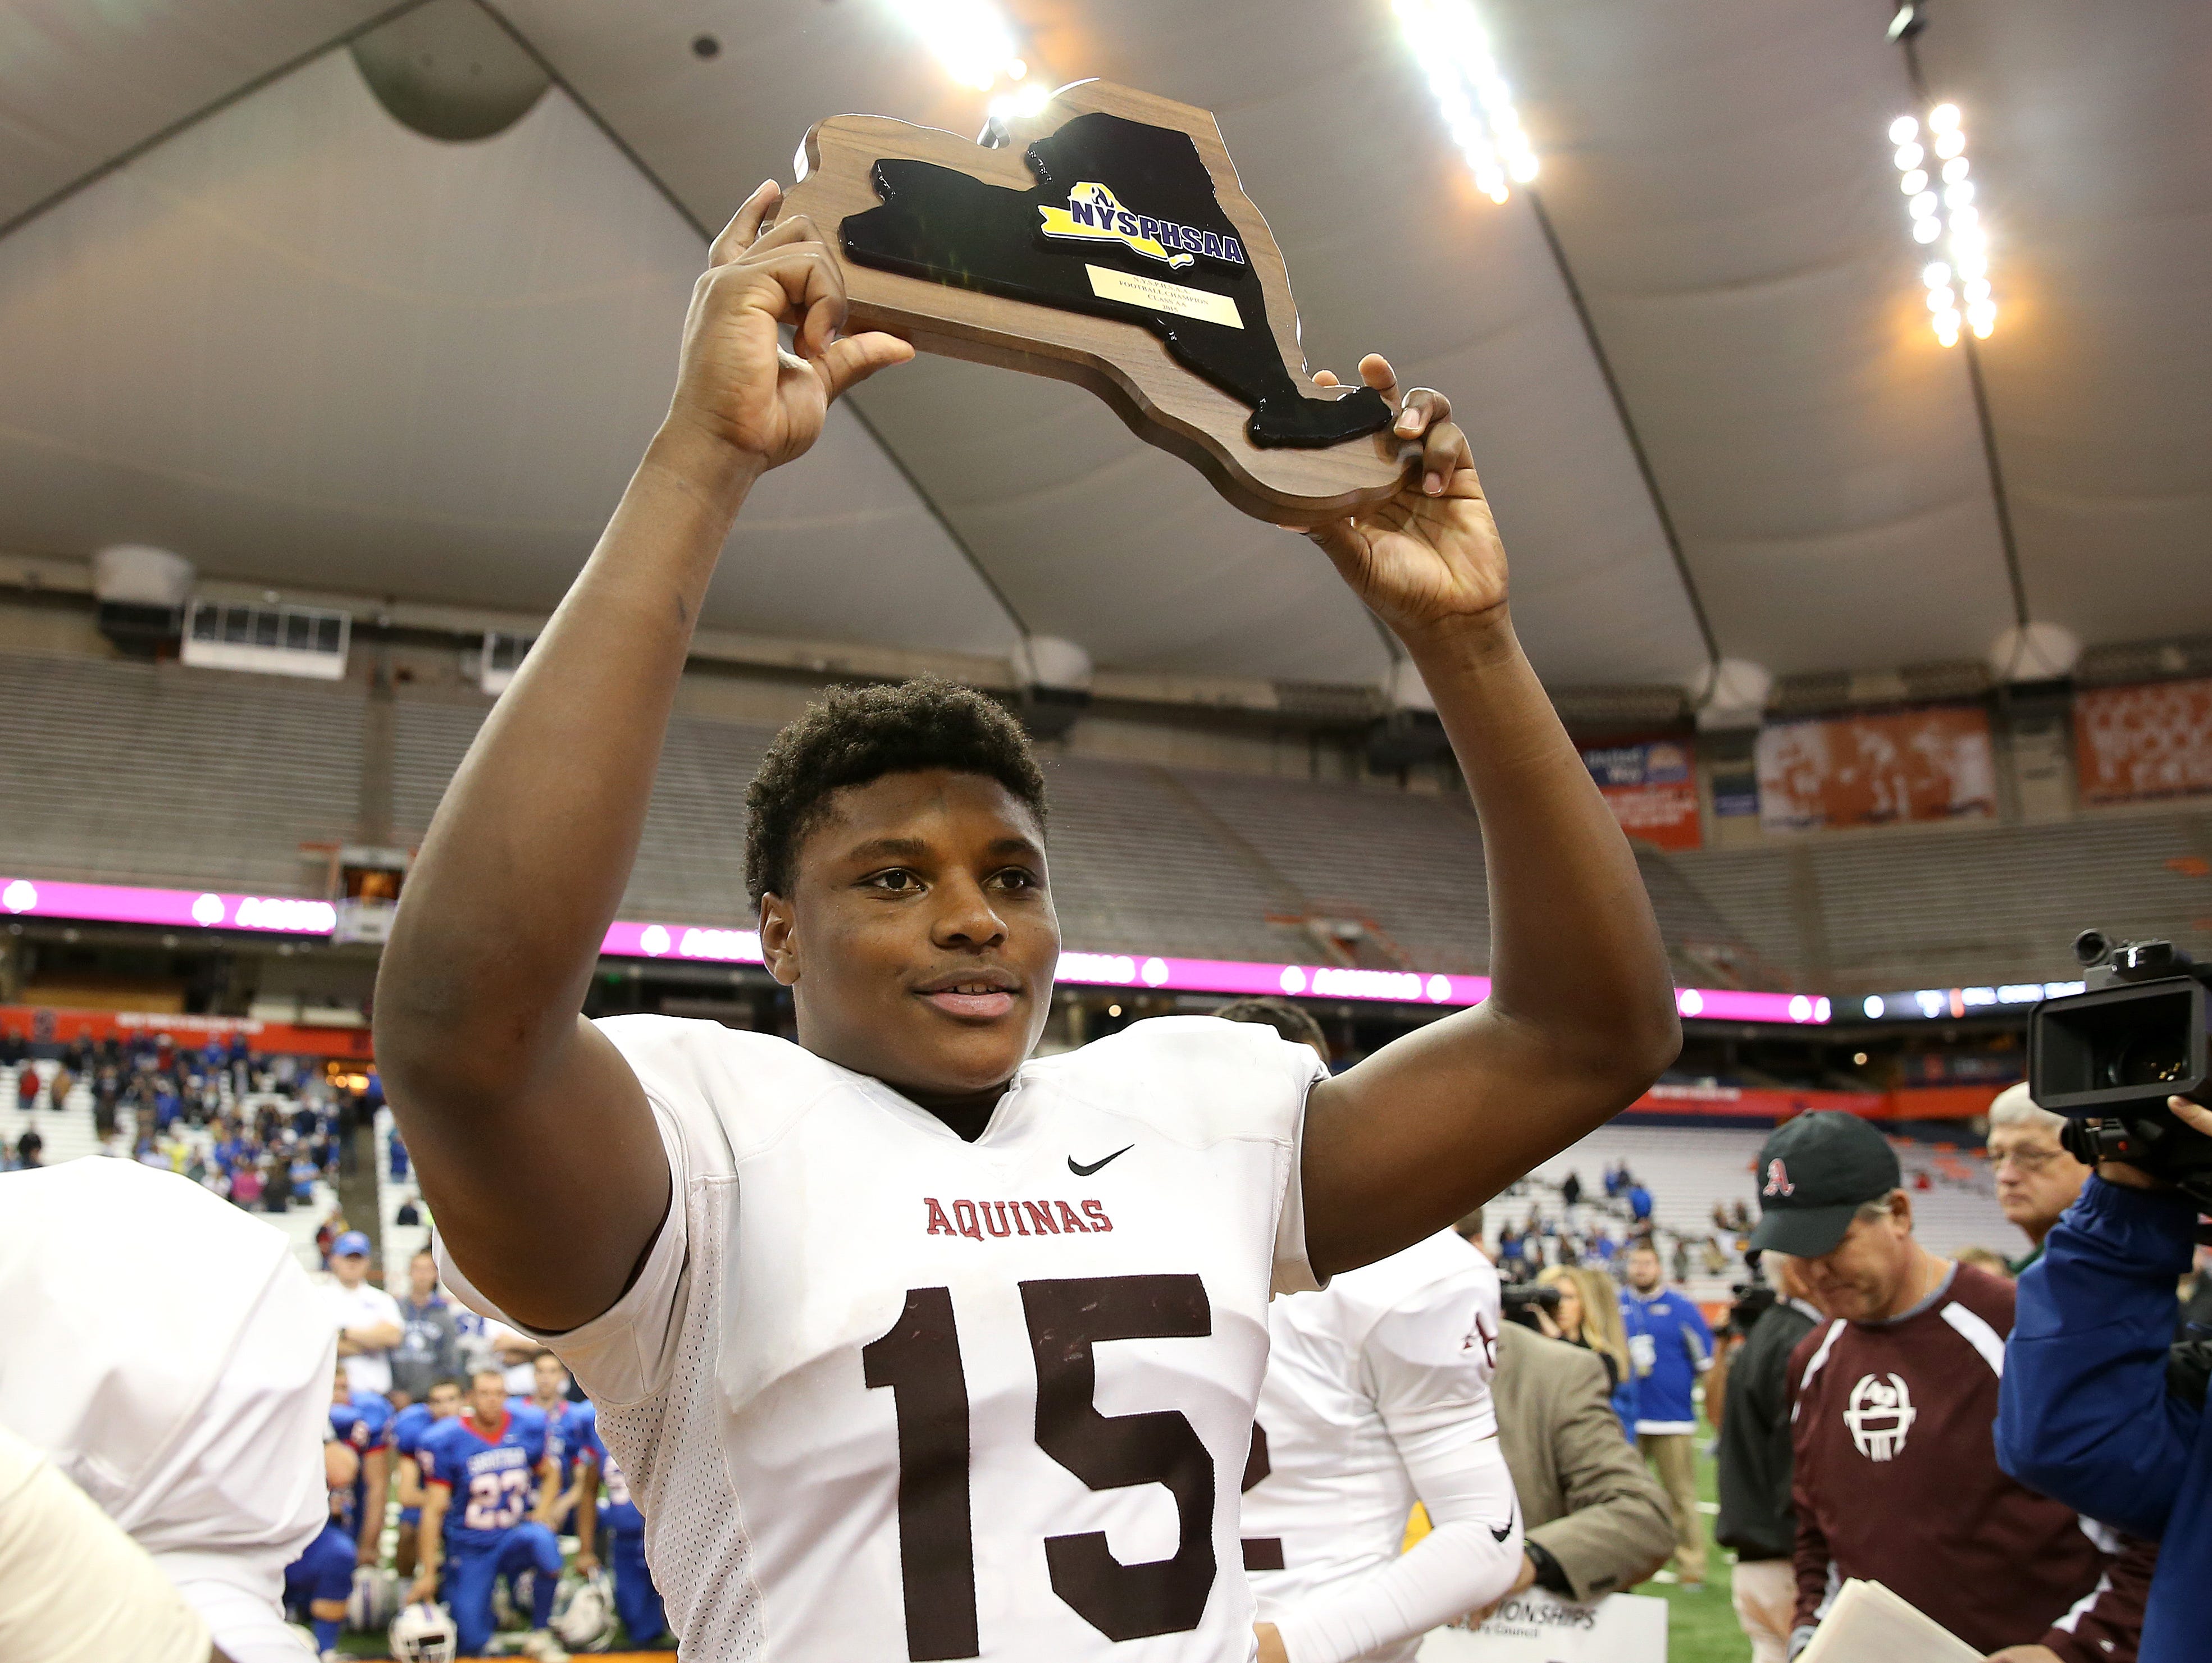 Jamir Jones holds up the championship plaque after beating Saratoga Springs 44-19 to win State Class AA title.